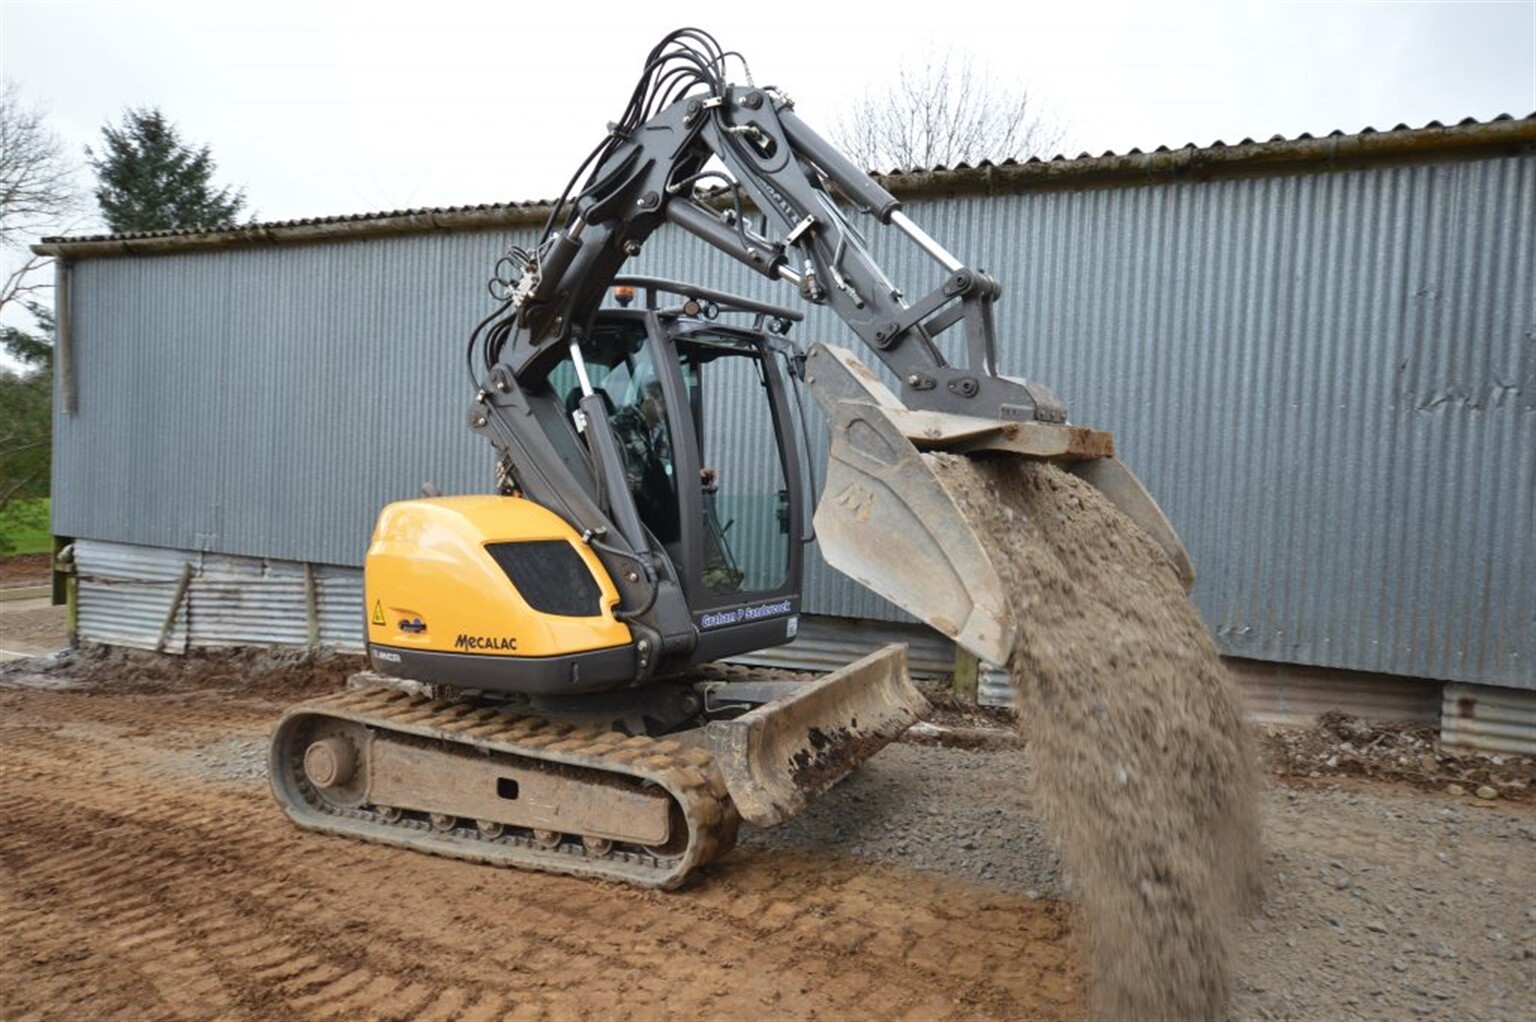 Is it a skid-steer or an excavator, no its a Mecalac